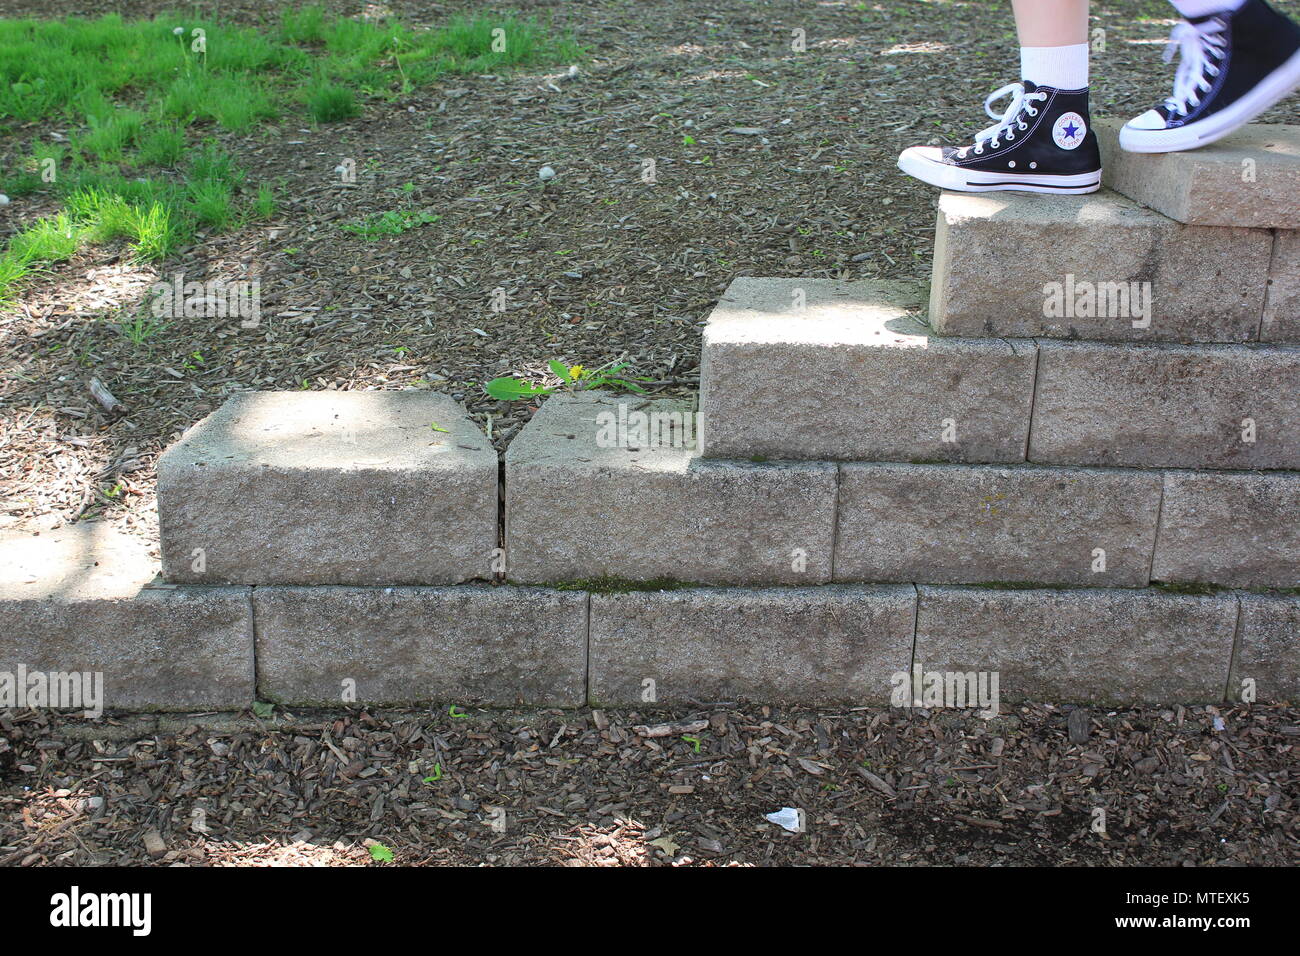 Teenaged girl walking up and down the stairs wearing white socks and a pair of black converse sneaker high-tops. Stock Photo